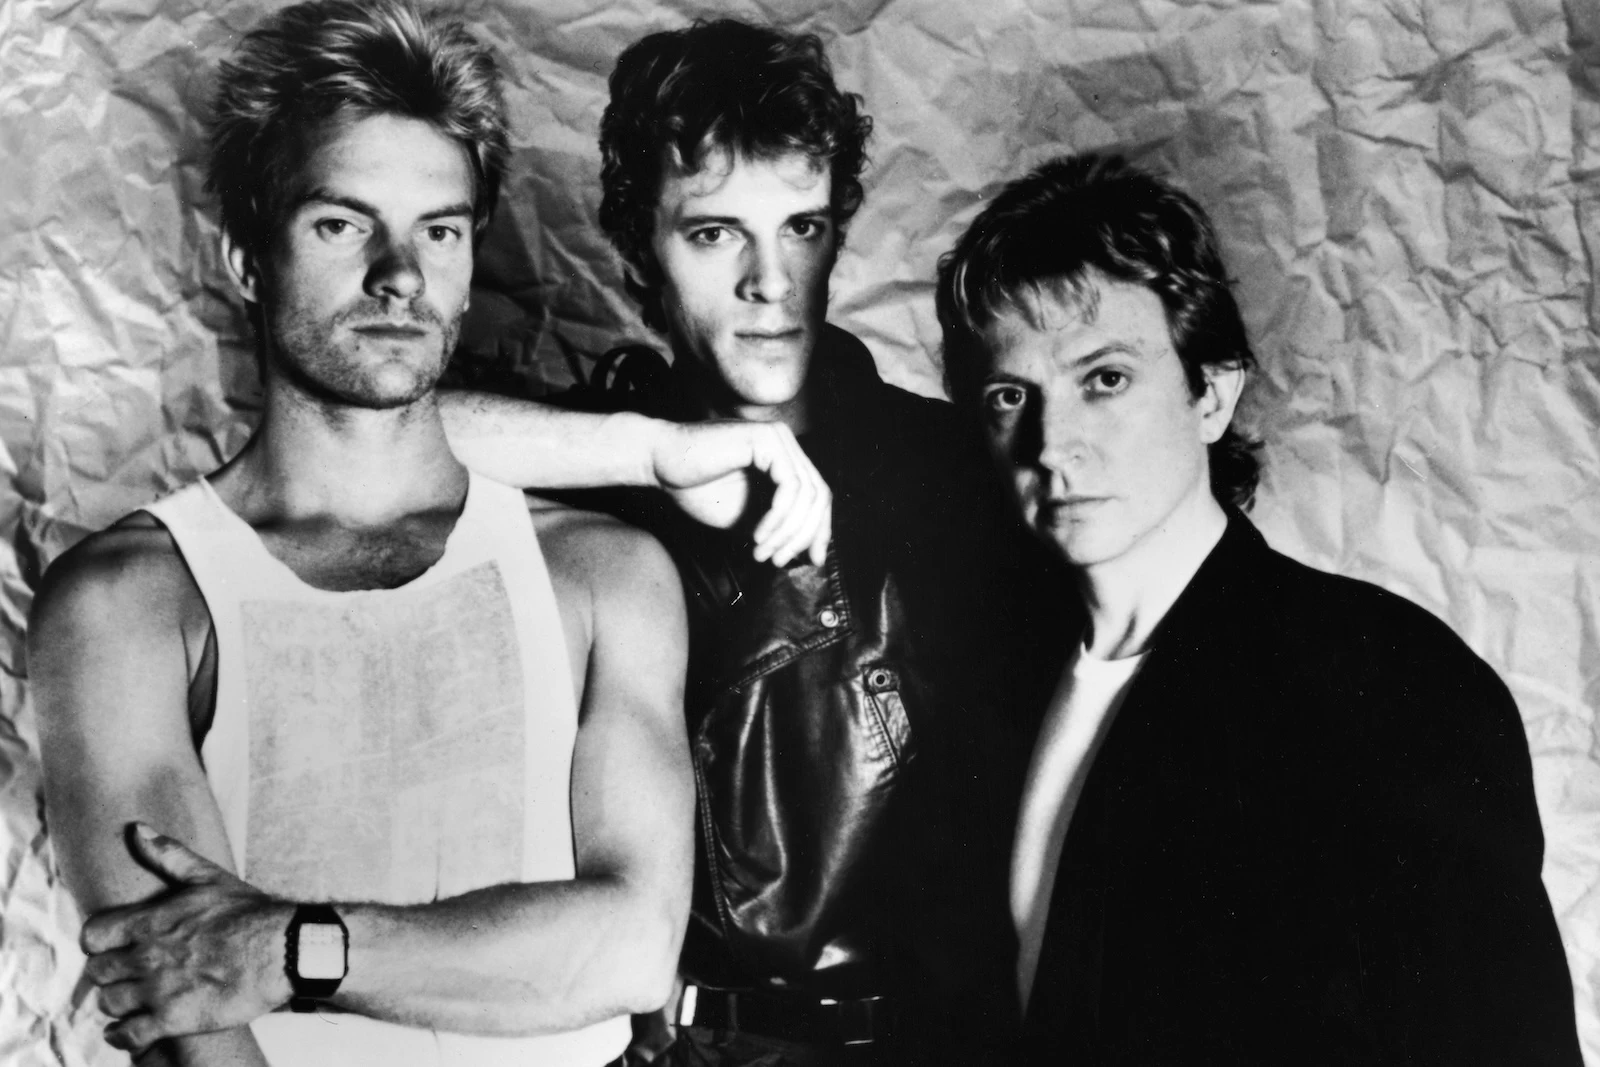 Listen as the Police’s ‘Every Breath You Take’ Comes to Life